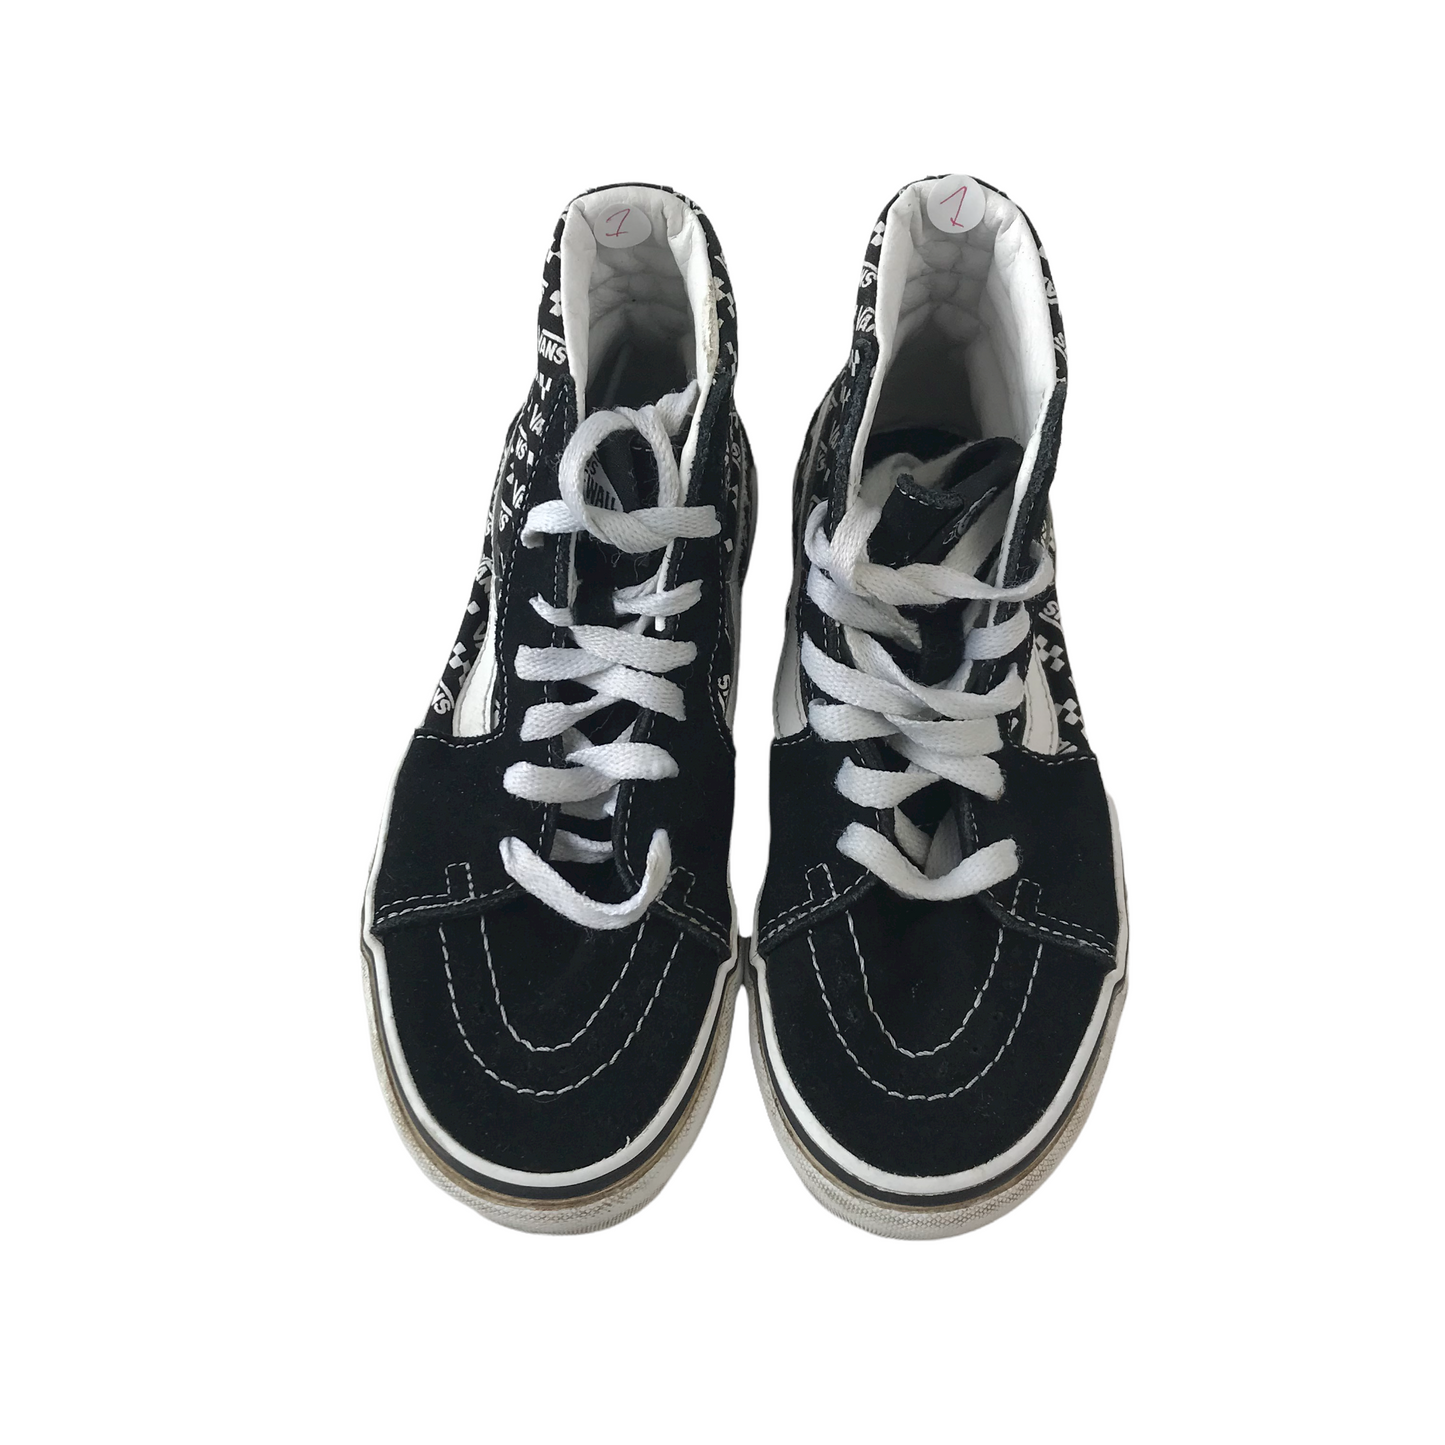 Vans Black and White High Tops Trainers Shoe Size 1